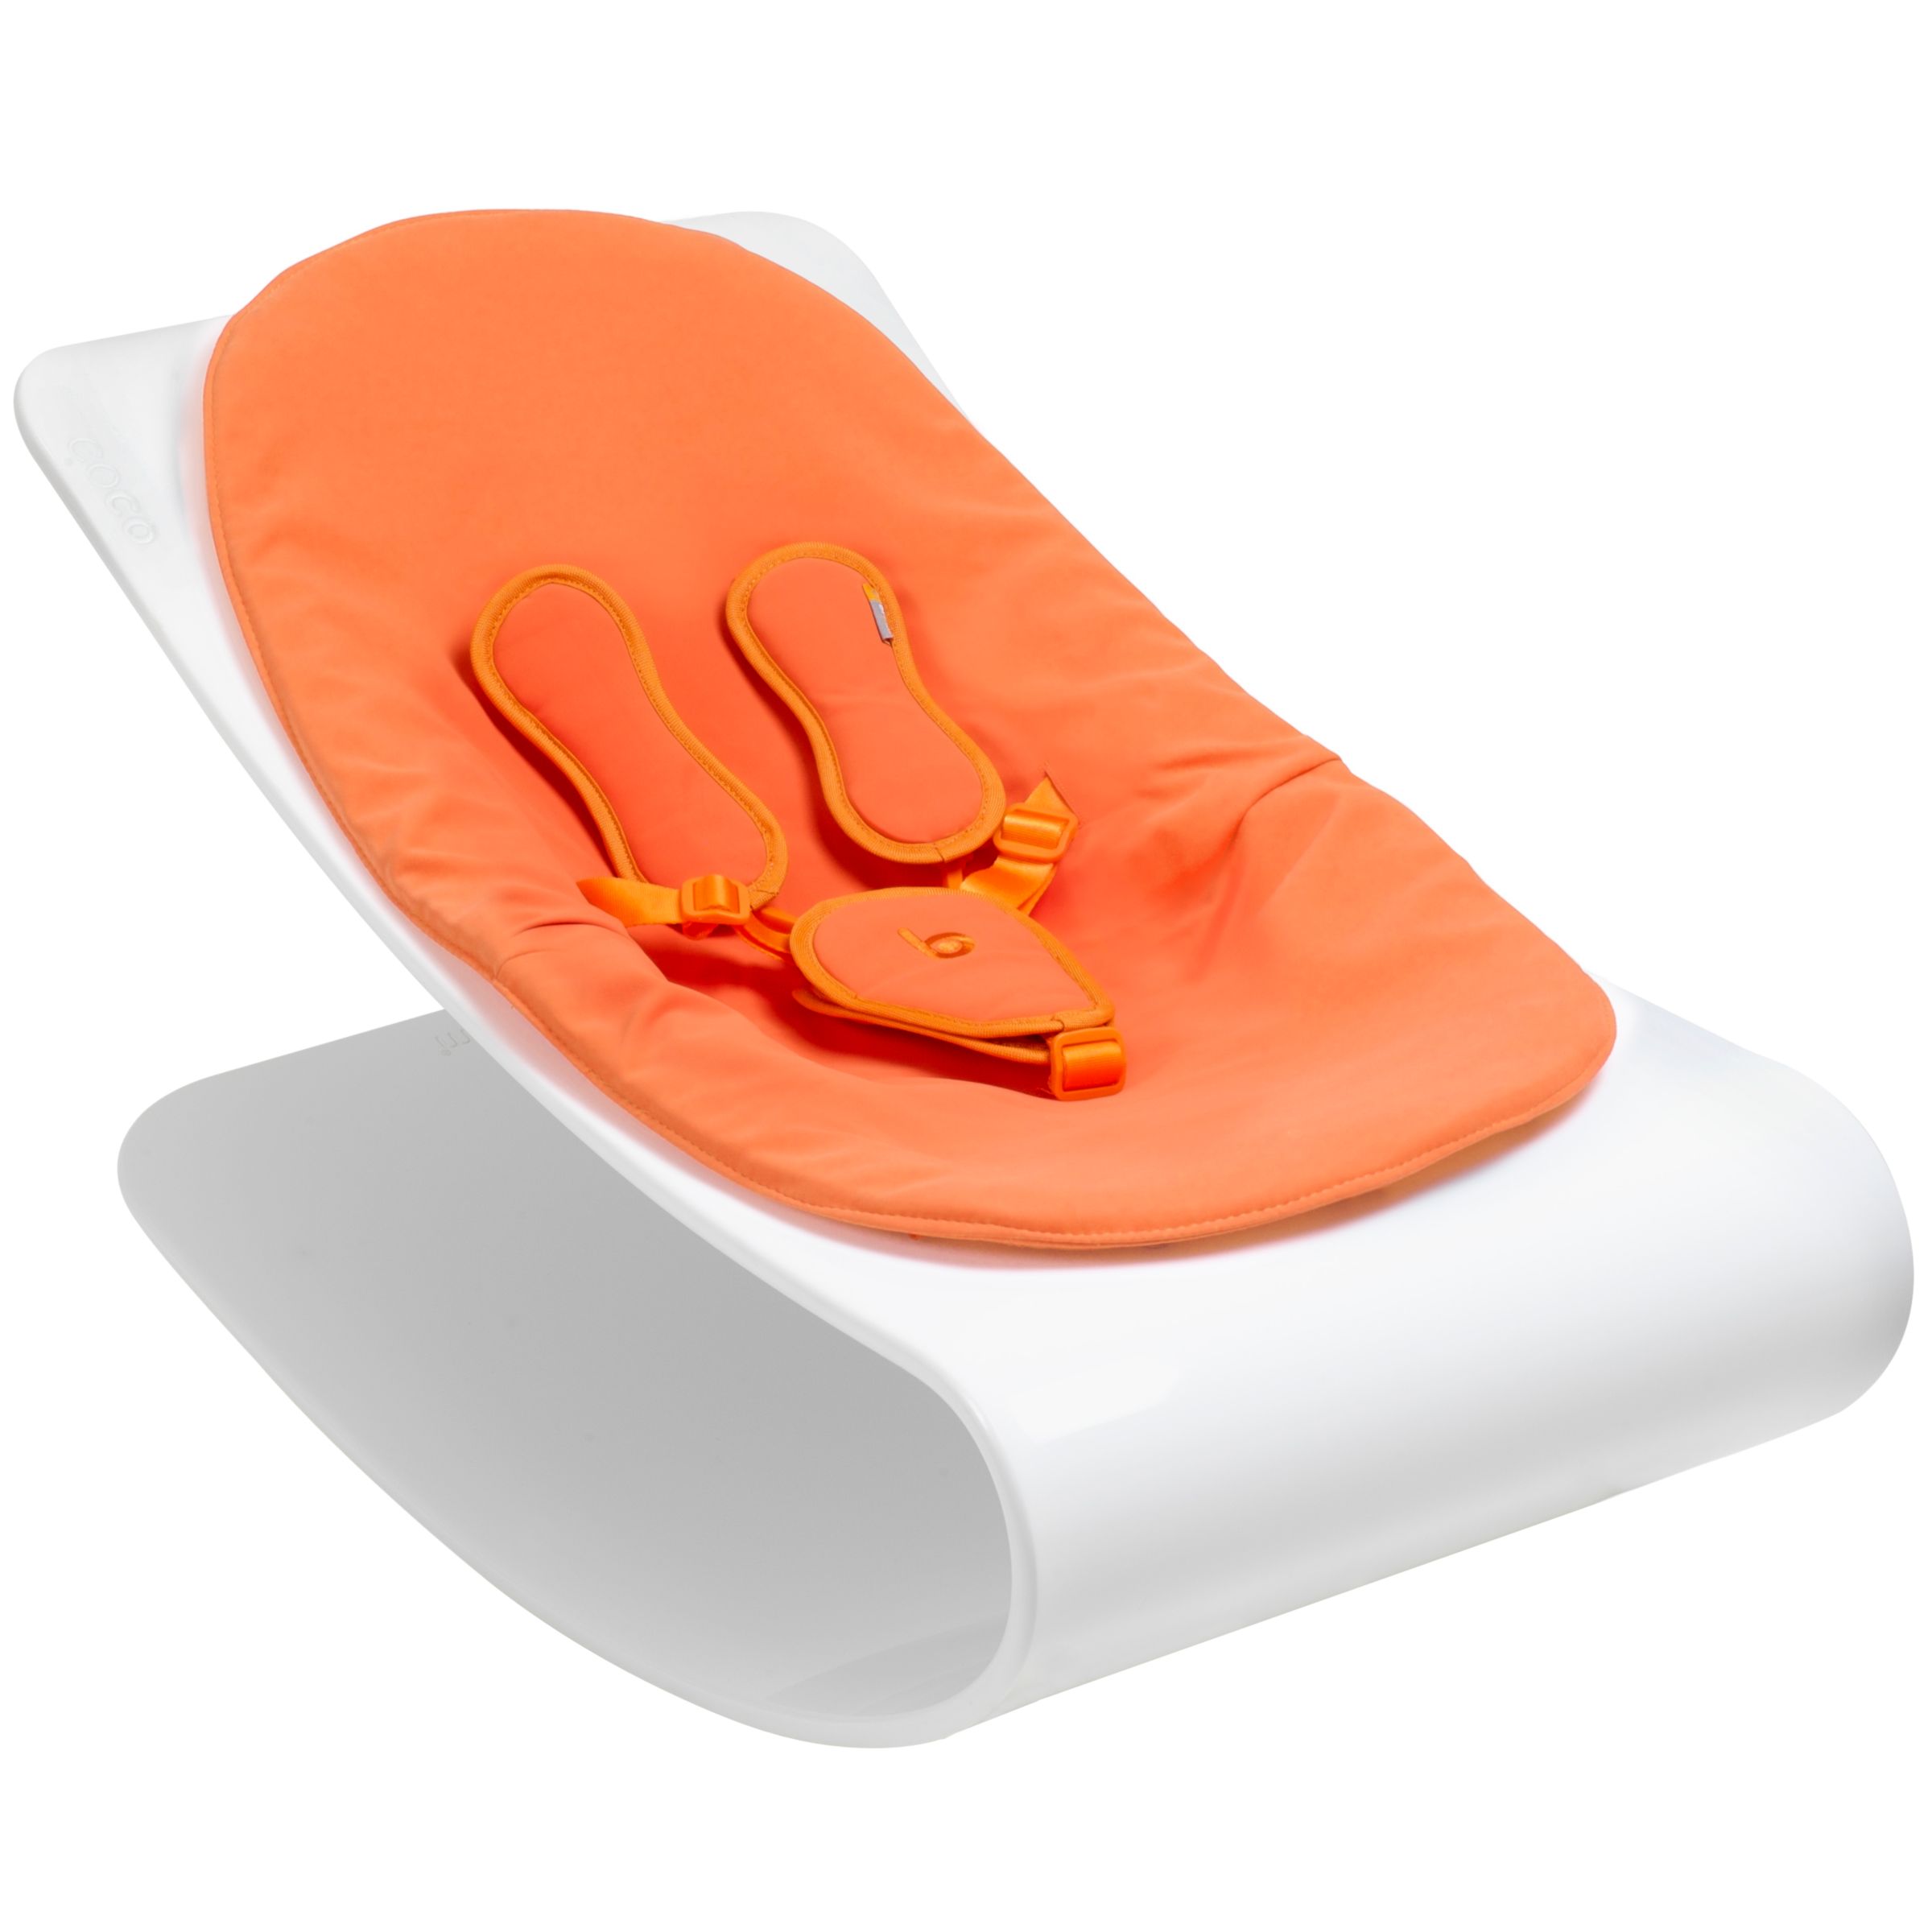 bloom Coco Plexistyle Baby Lounger, Ivory White with Harvest Orange at John Lewis